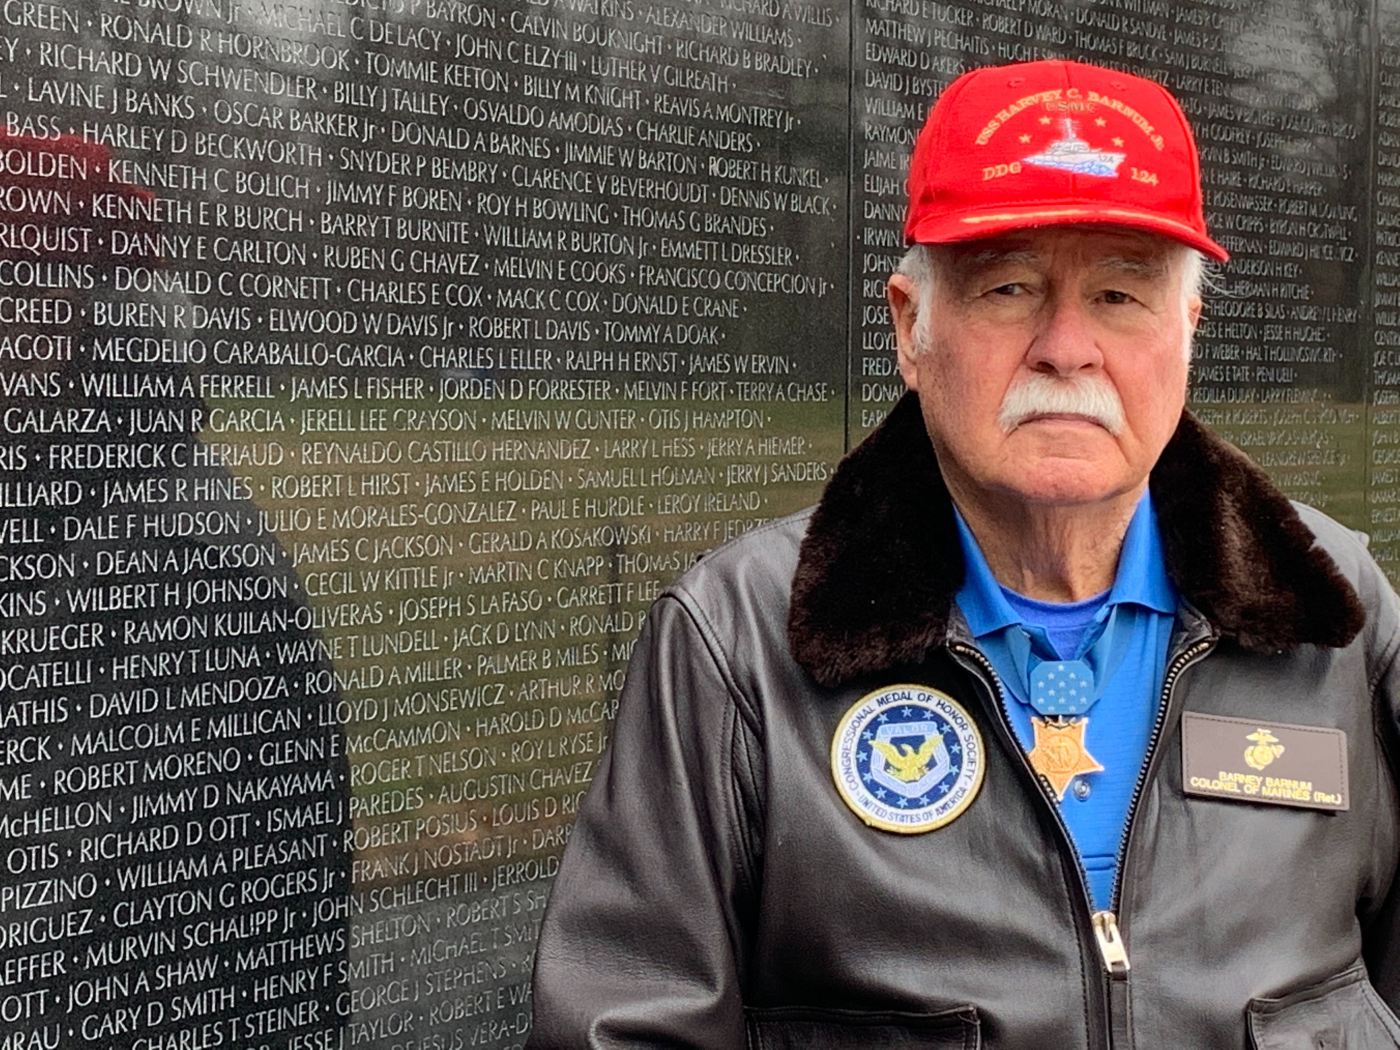 Medal of Honor recipient and Marine Veteran Barney Barnum stands in front of the Vietnam Wall in Washington, D.C.